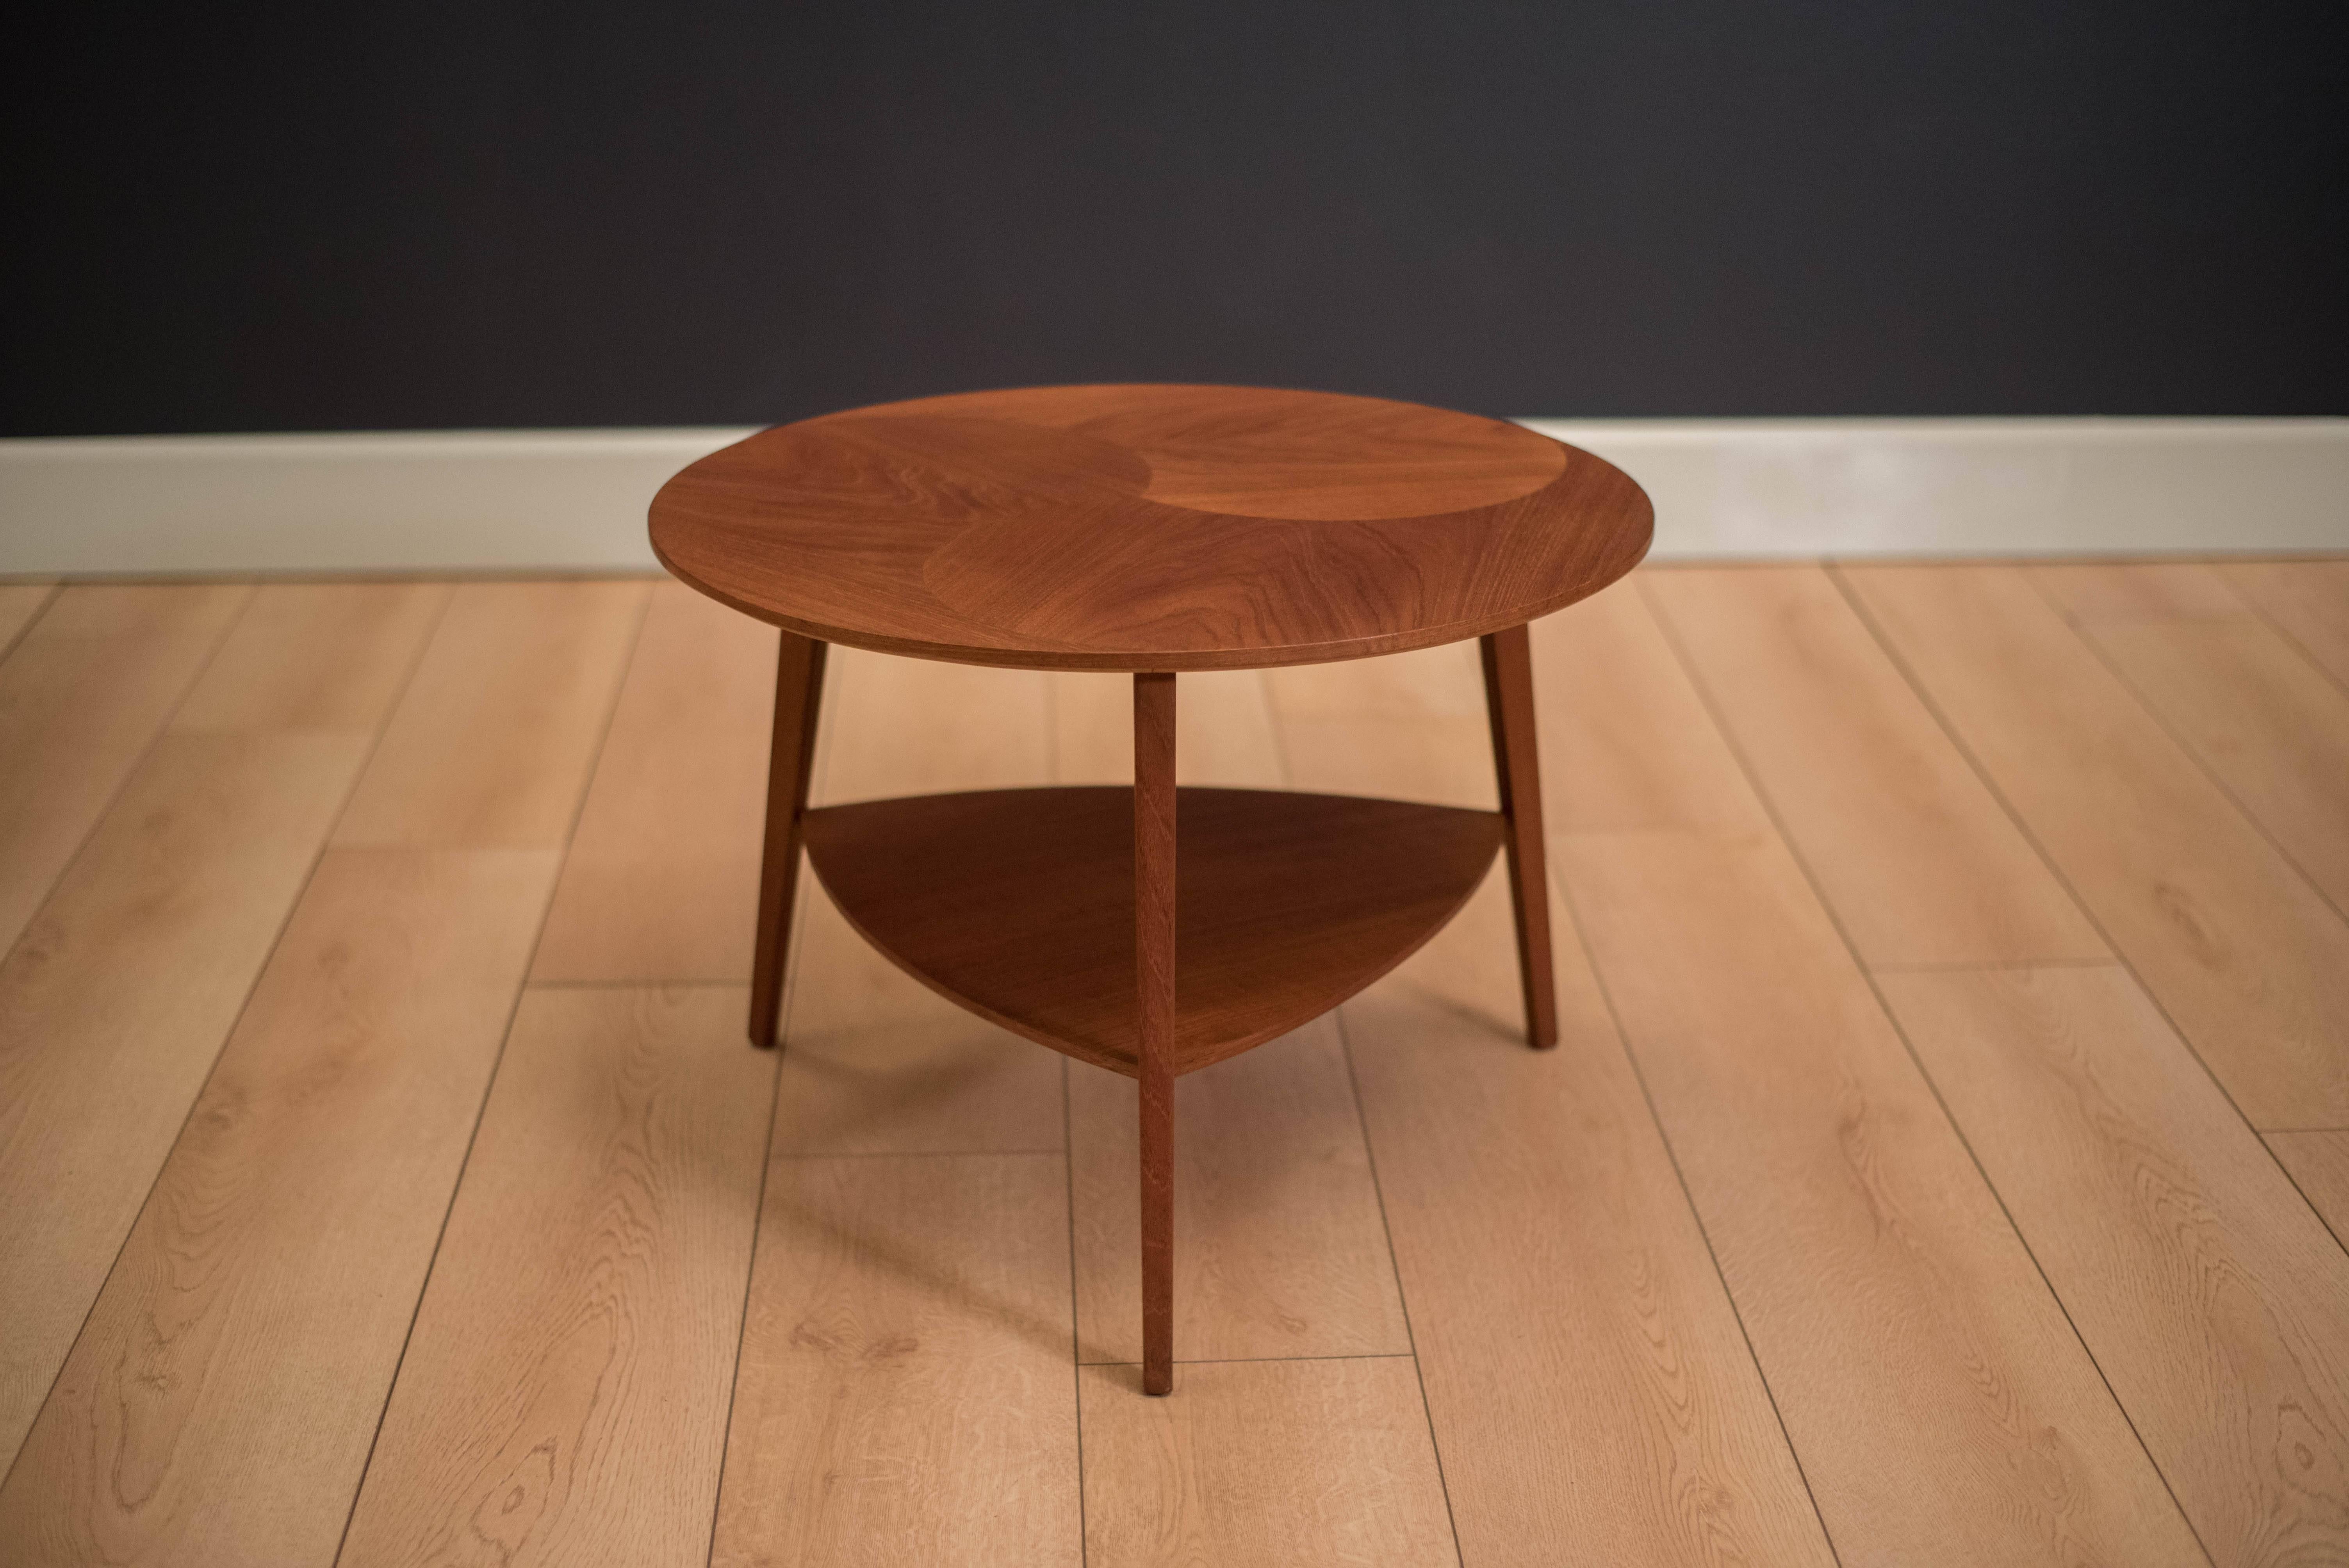 Mid-Century Modern round teak side table manufactured by Mobelintarsia, Denmark. This two-tier piece features a unique round top with a lower triangular shelf.